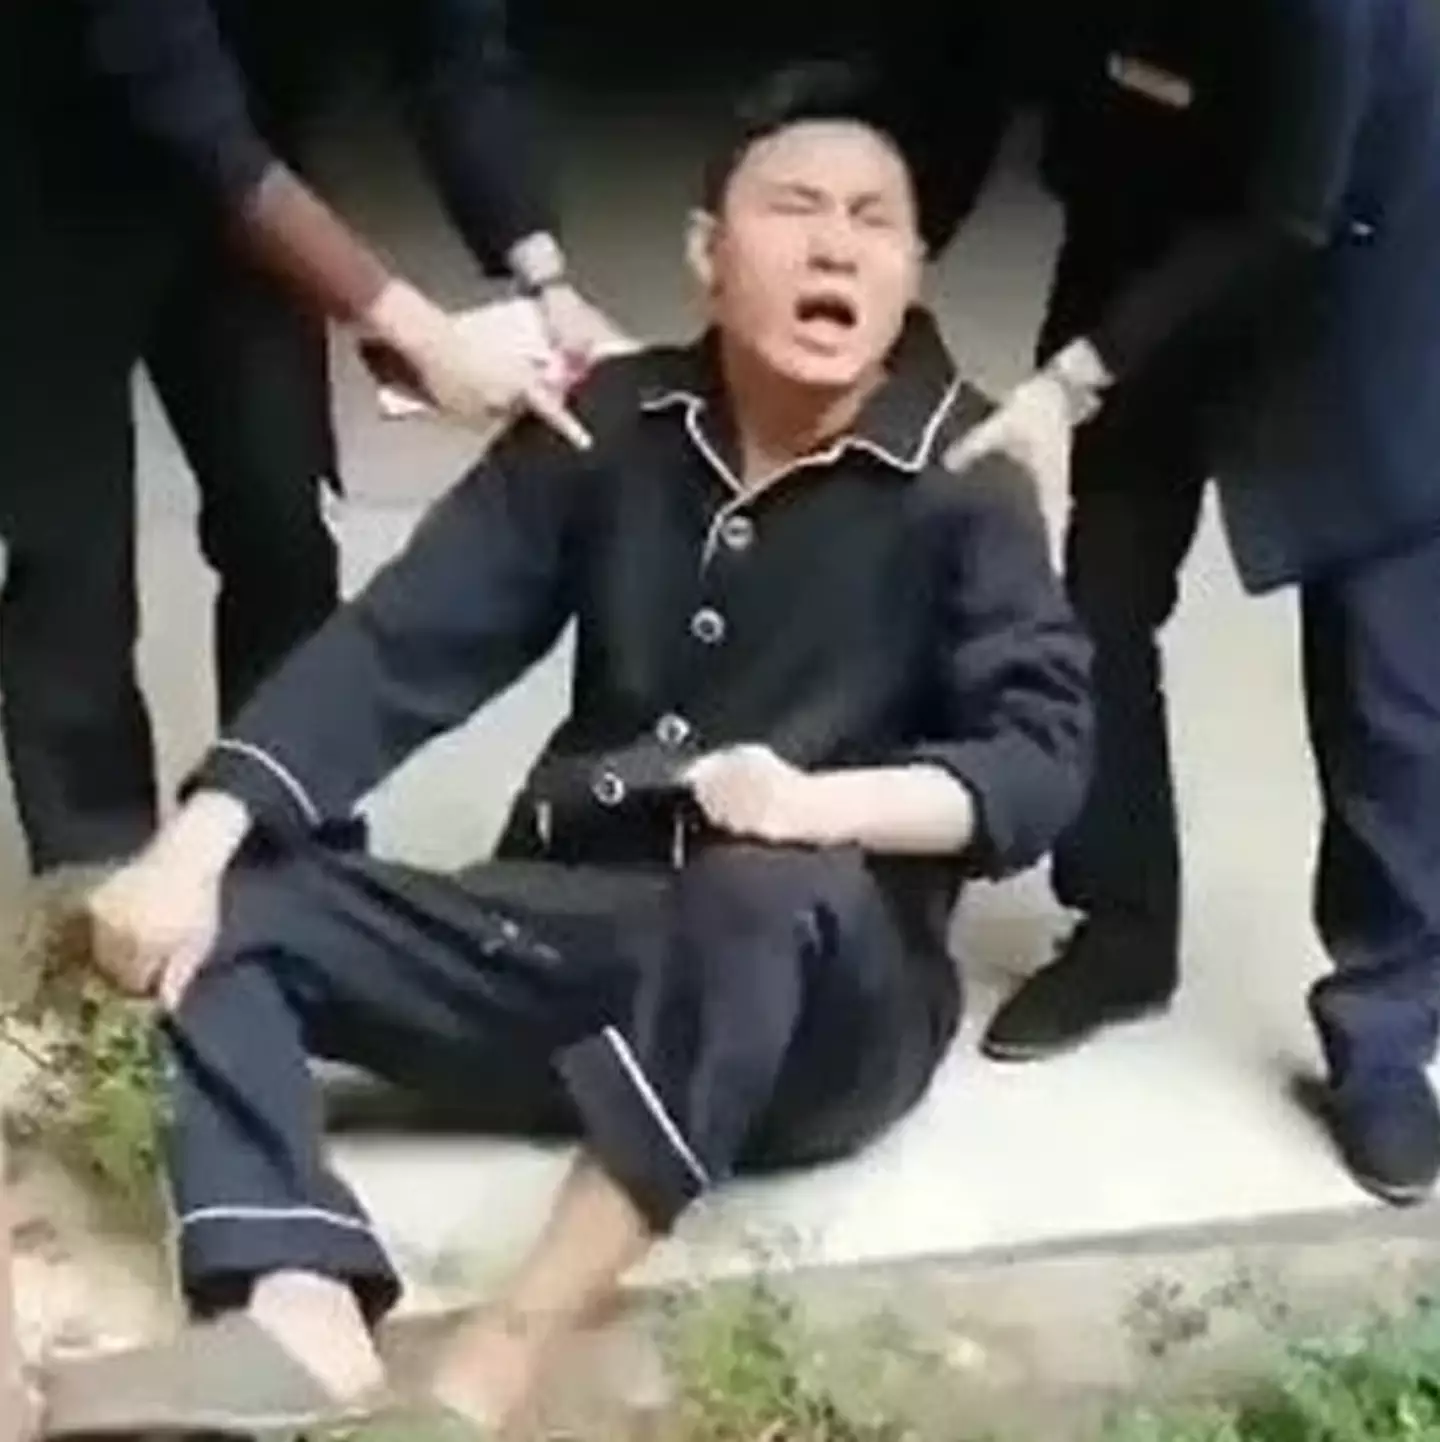 Zhang was shown to be sobbing after throwing his children out of the apartment.